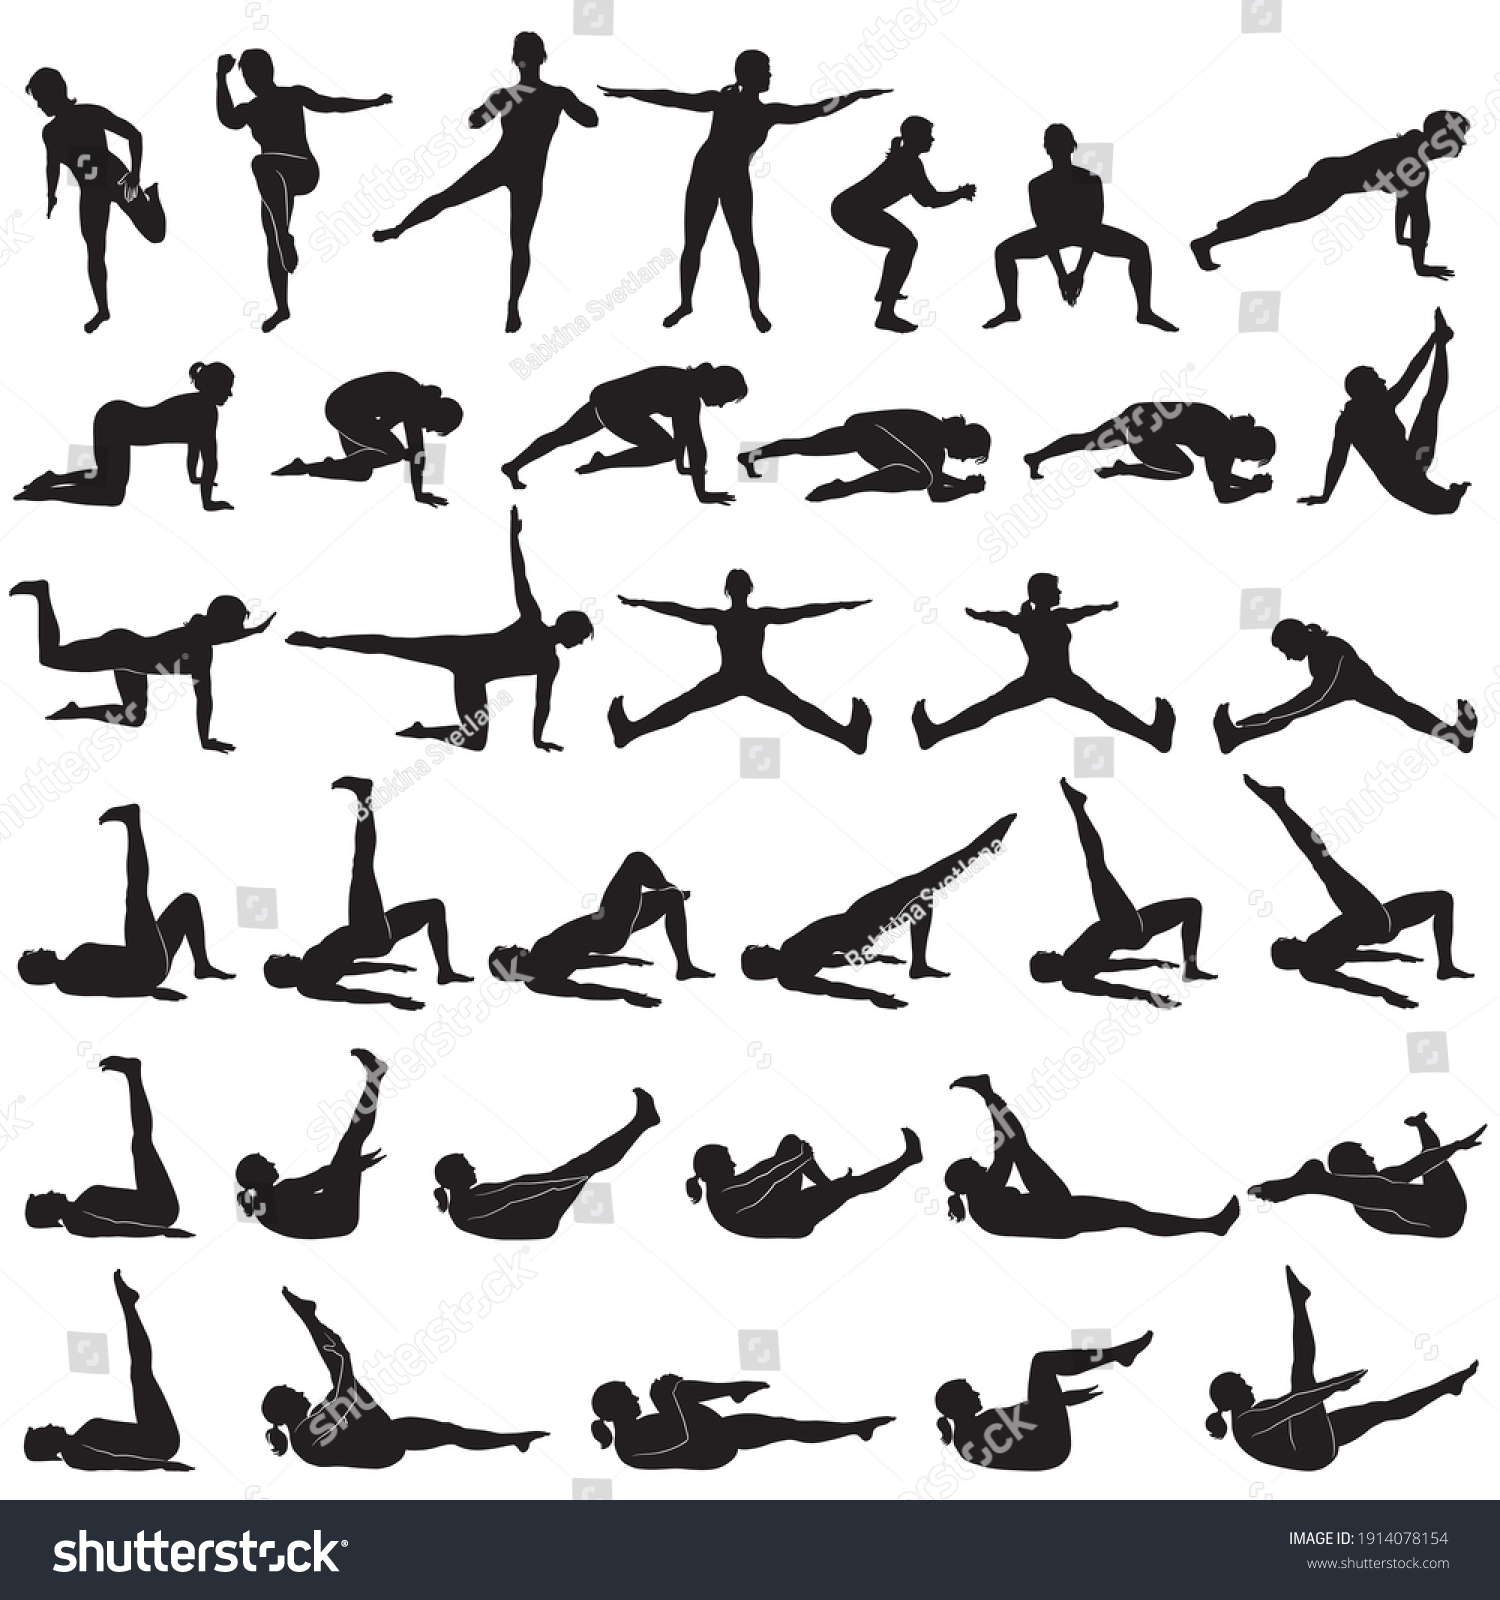 2,165,291 Body poses Images, Stock Photos & Vectors | Shutterstock